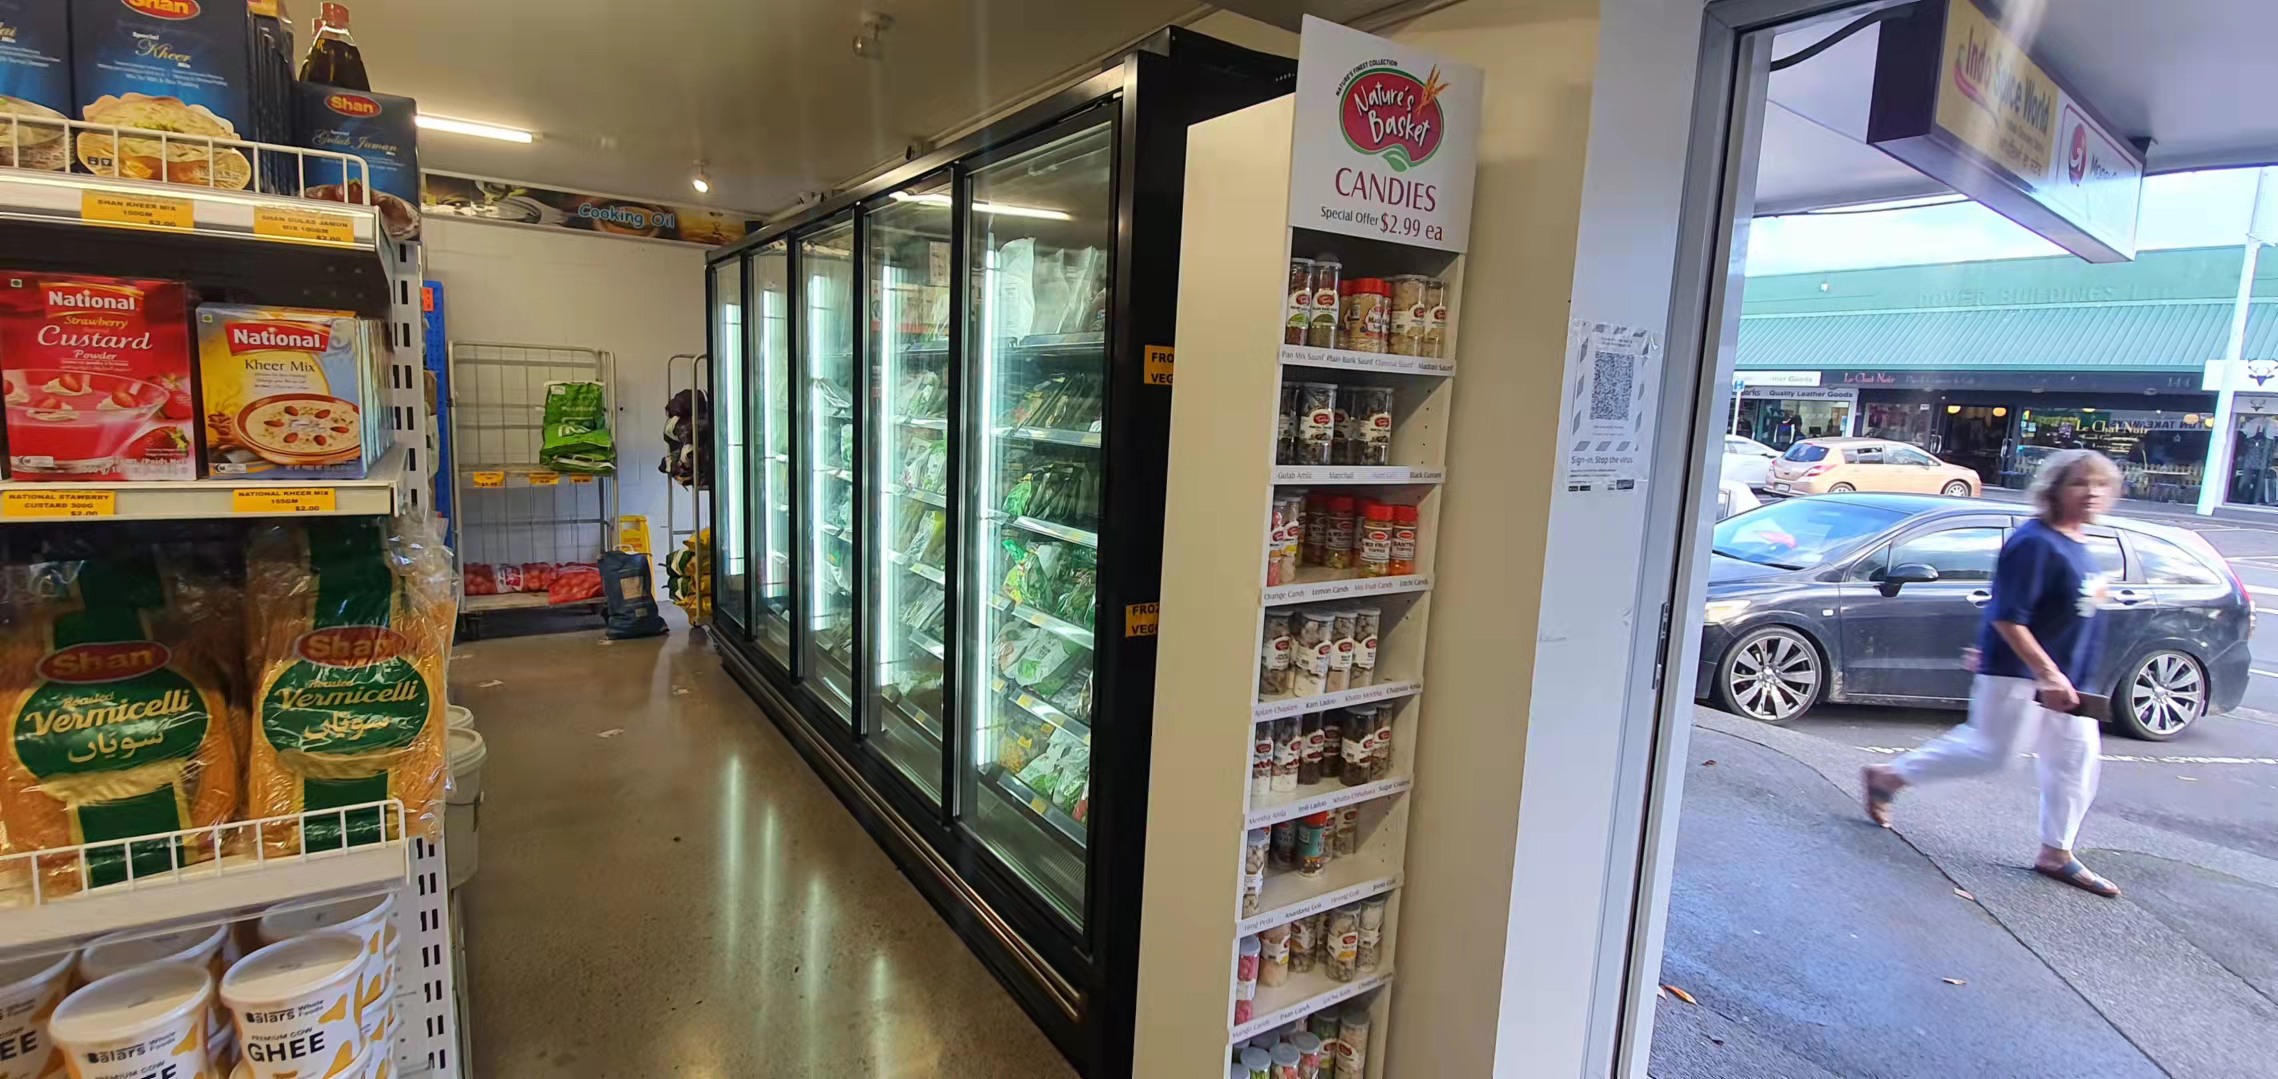 What should be paid attention to when supermarket refrigerators arrive?